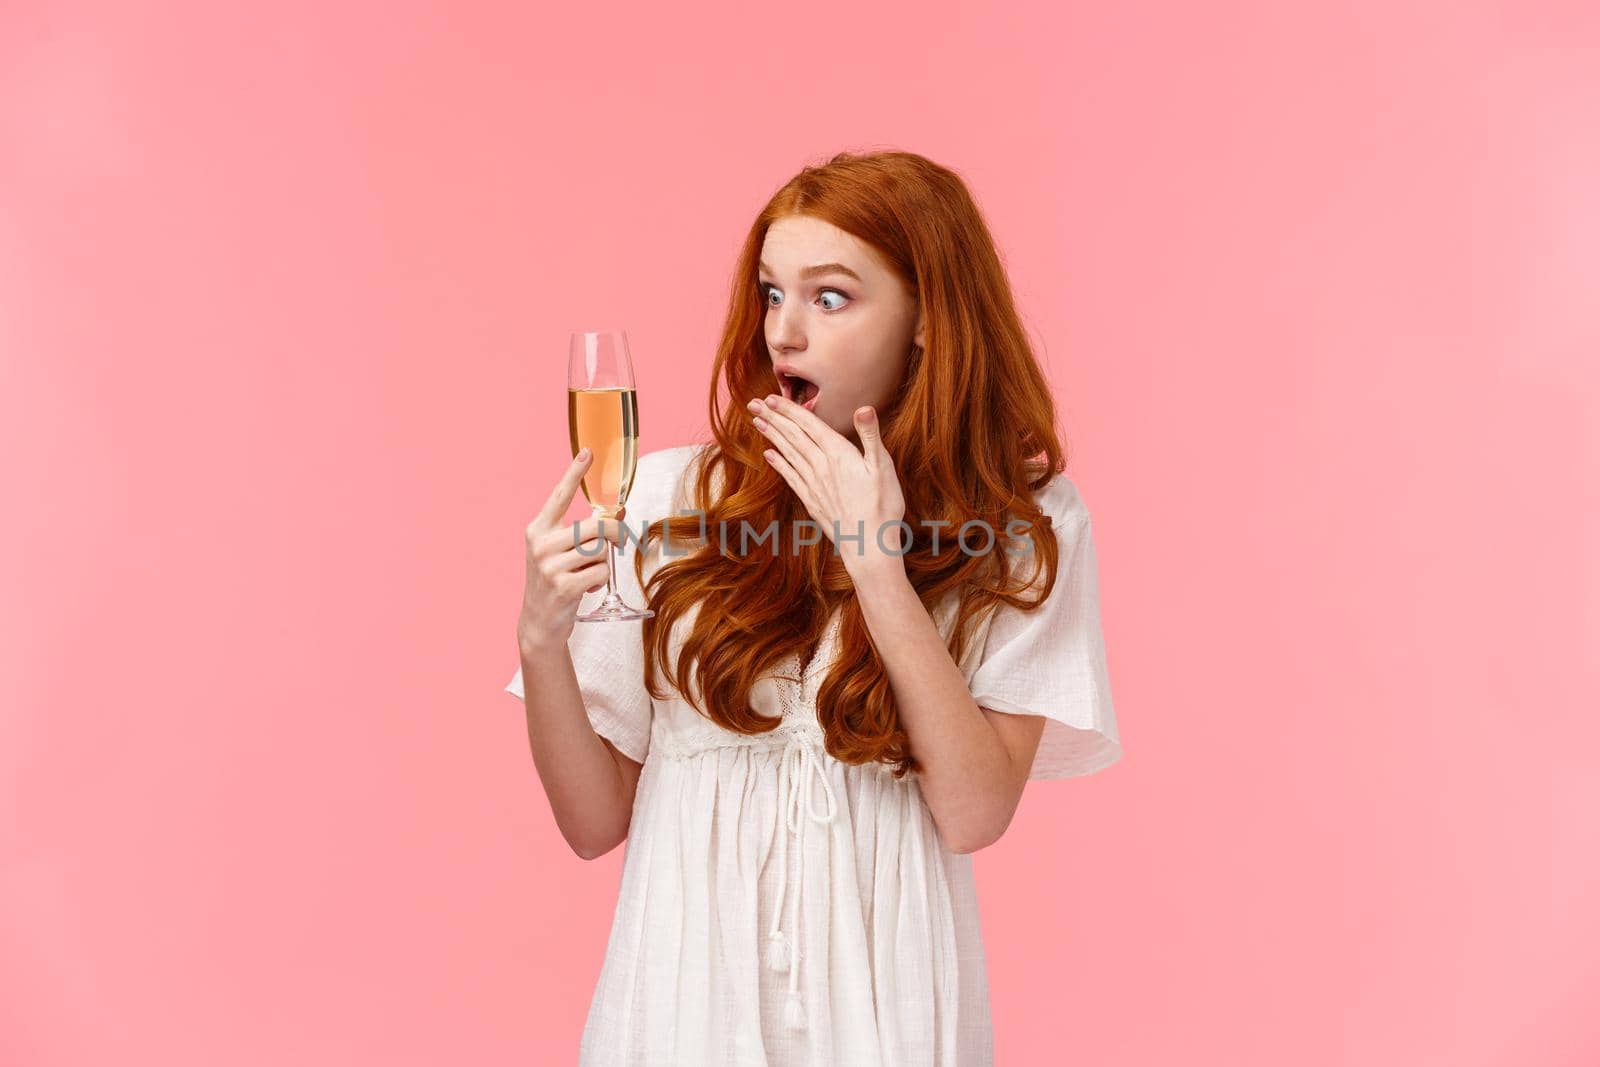 Shocked and astounded redhead woman surprised as cant remember when she took glass with champagne, have drinking problems, realise drank too much on party, standing pink background.